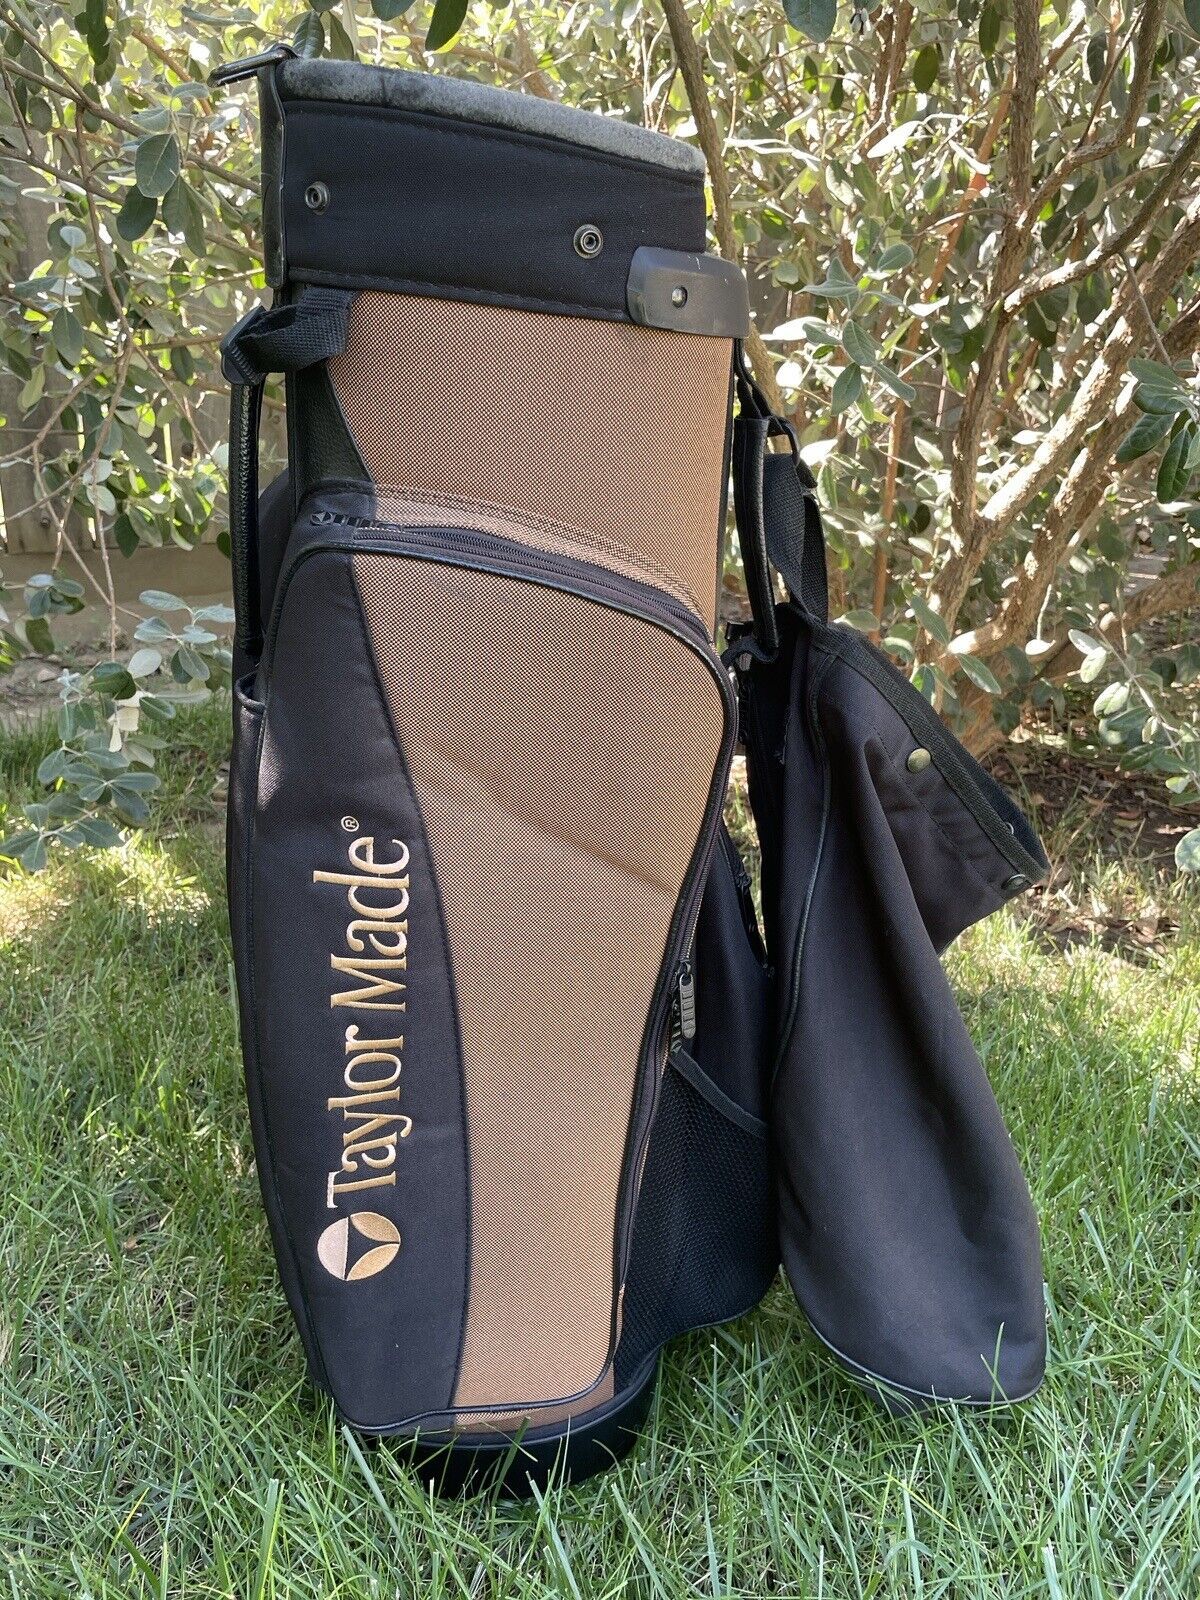 TaylorMade Golf Cart Bag 6 Way Divider Pacesetter Cart Black With Copper Color.